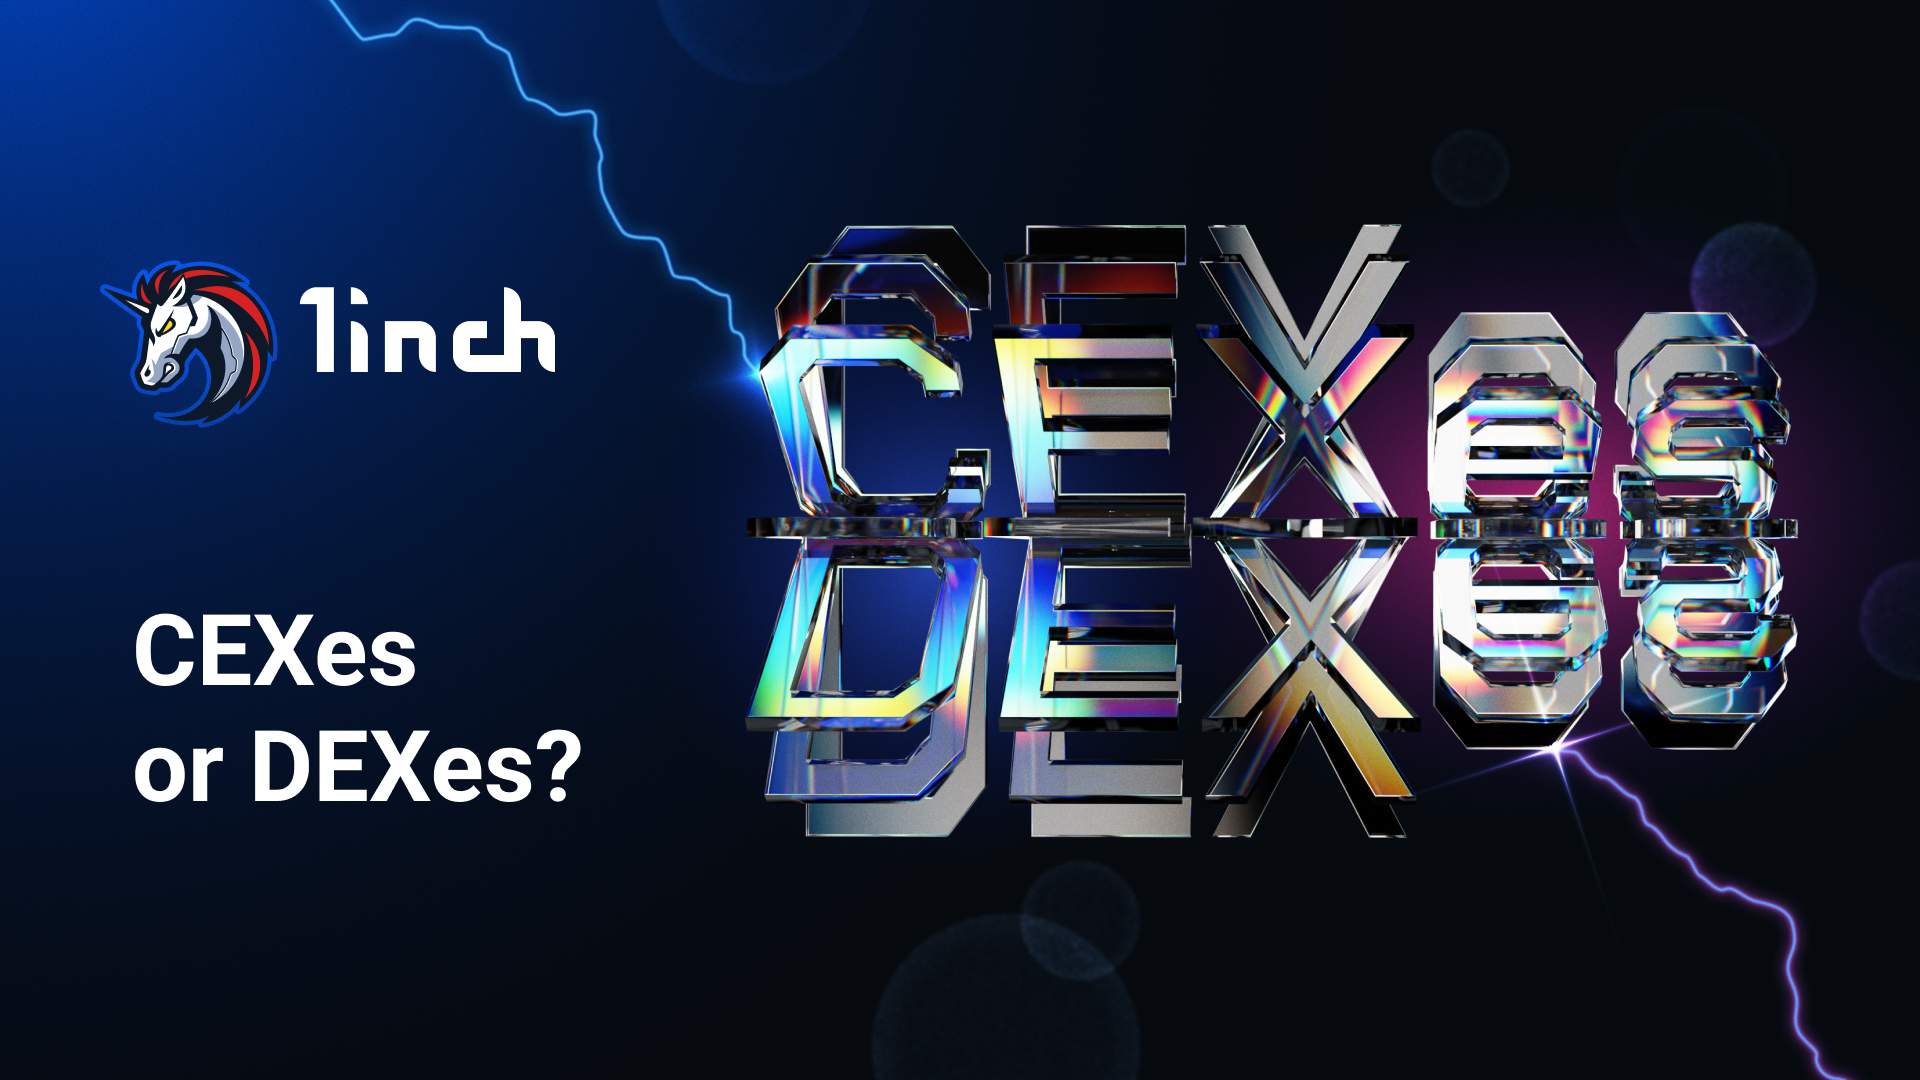 Cryptocurrency exchanges: what's the difference between CEXes and DEXes?